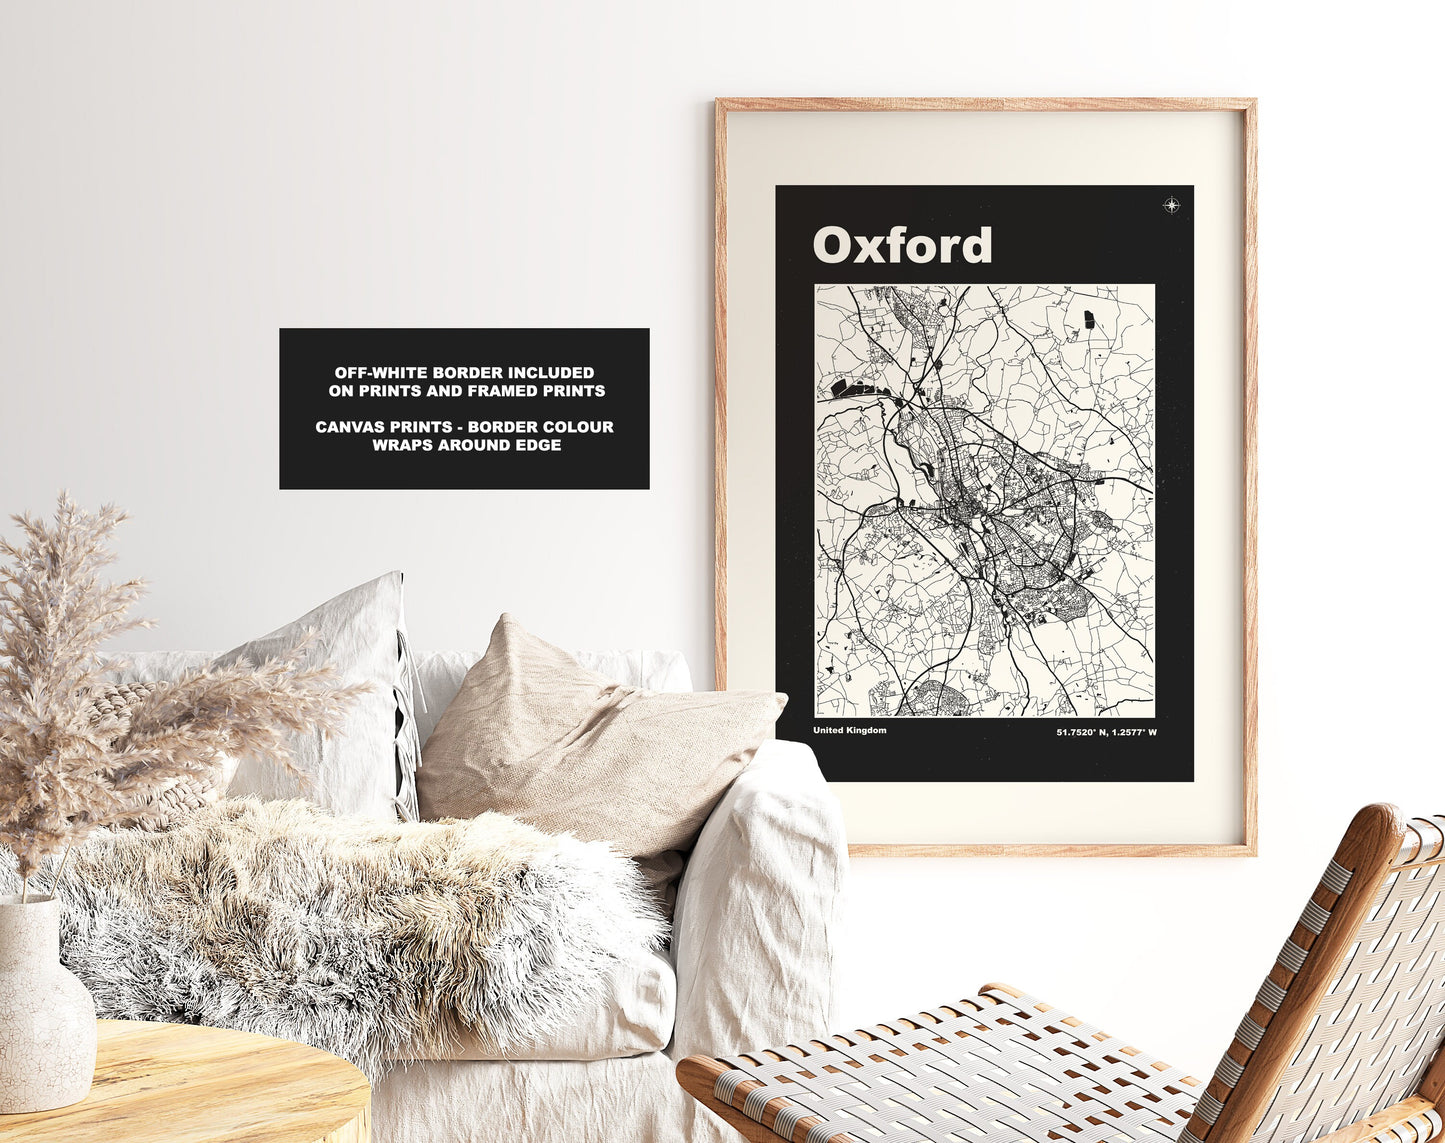 Oxford Print - Map Print - Mid Century Modern  - Retro - Vintage - Contemporary - Oxford Print - Map - Map Poster - Gift - Oxfordshire